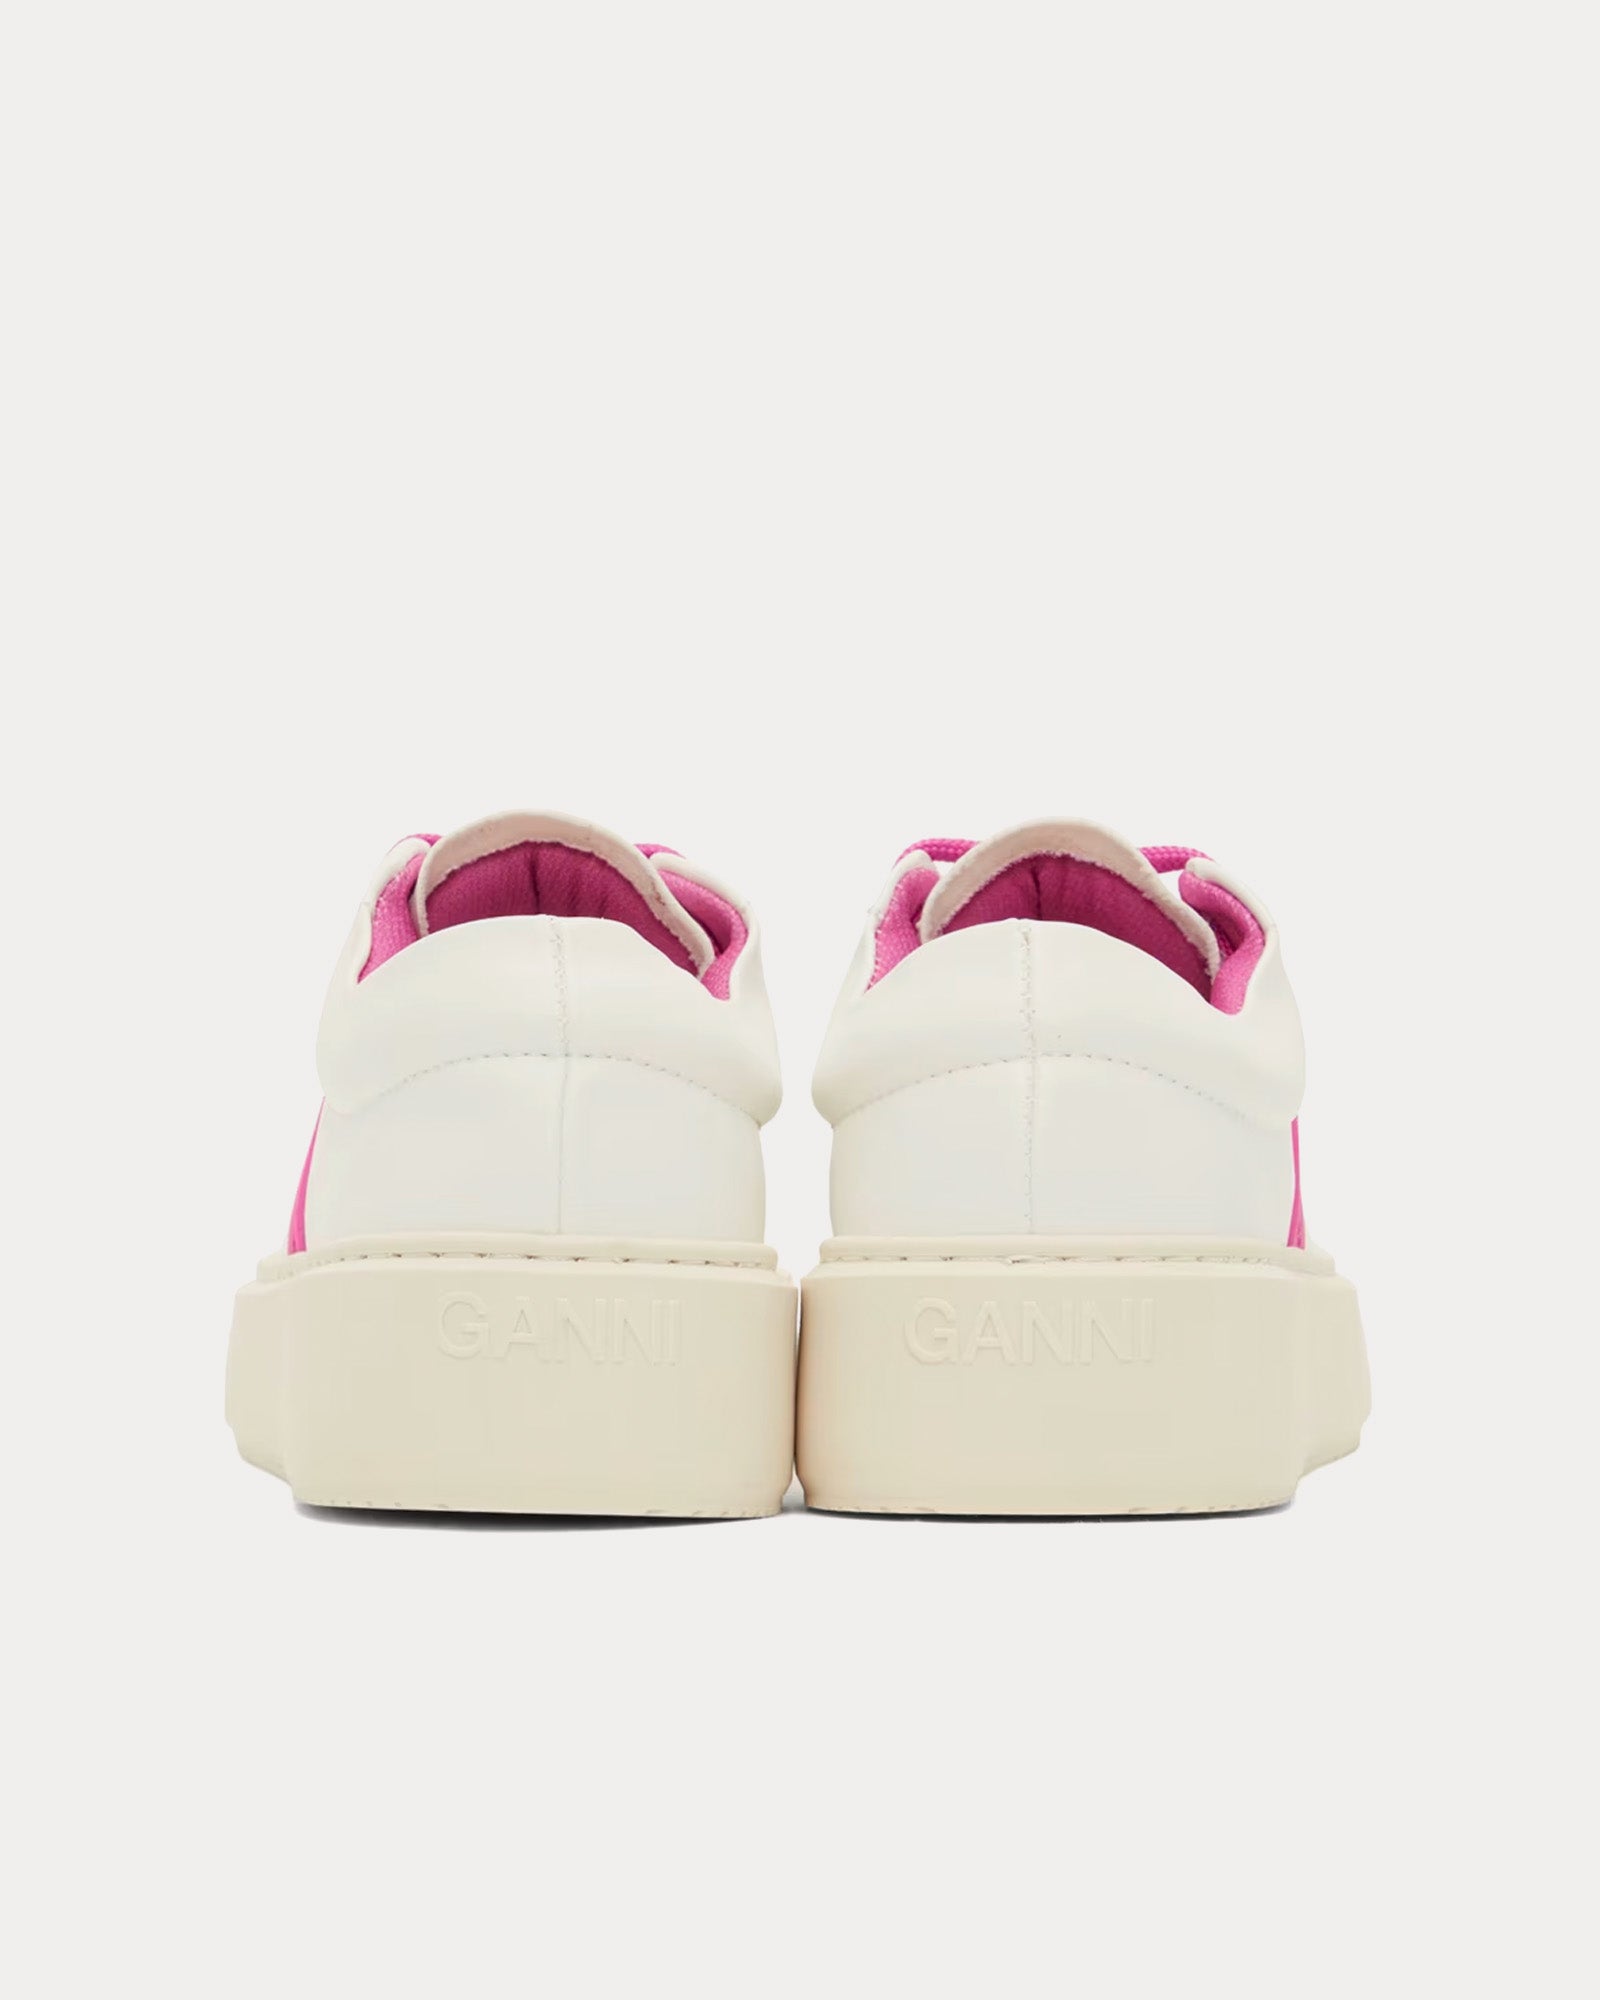 Ganni - Sporty Mix Cupsole White / Shocking Pink Low Top Sneakers